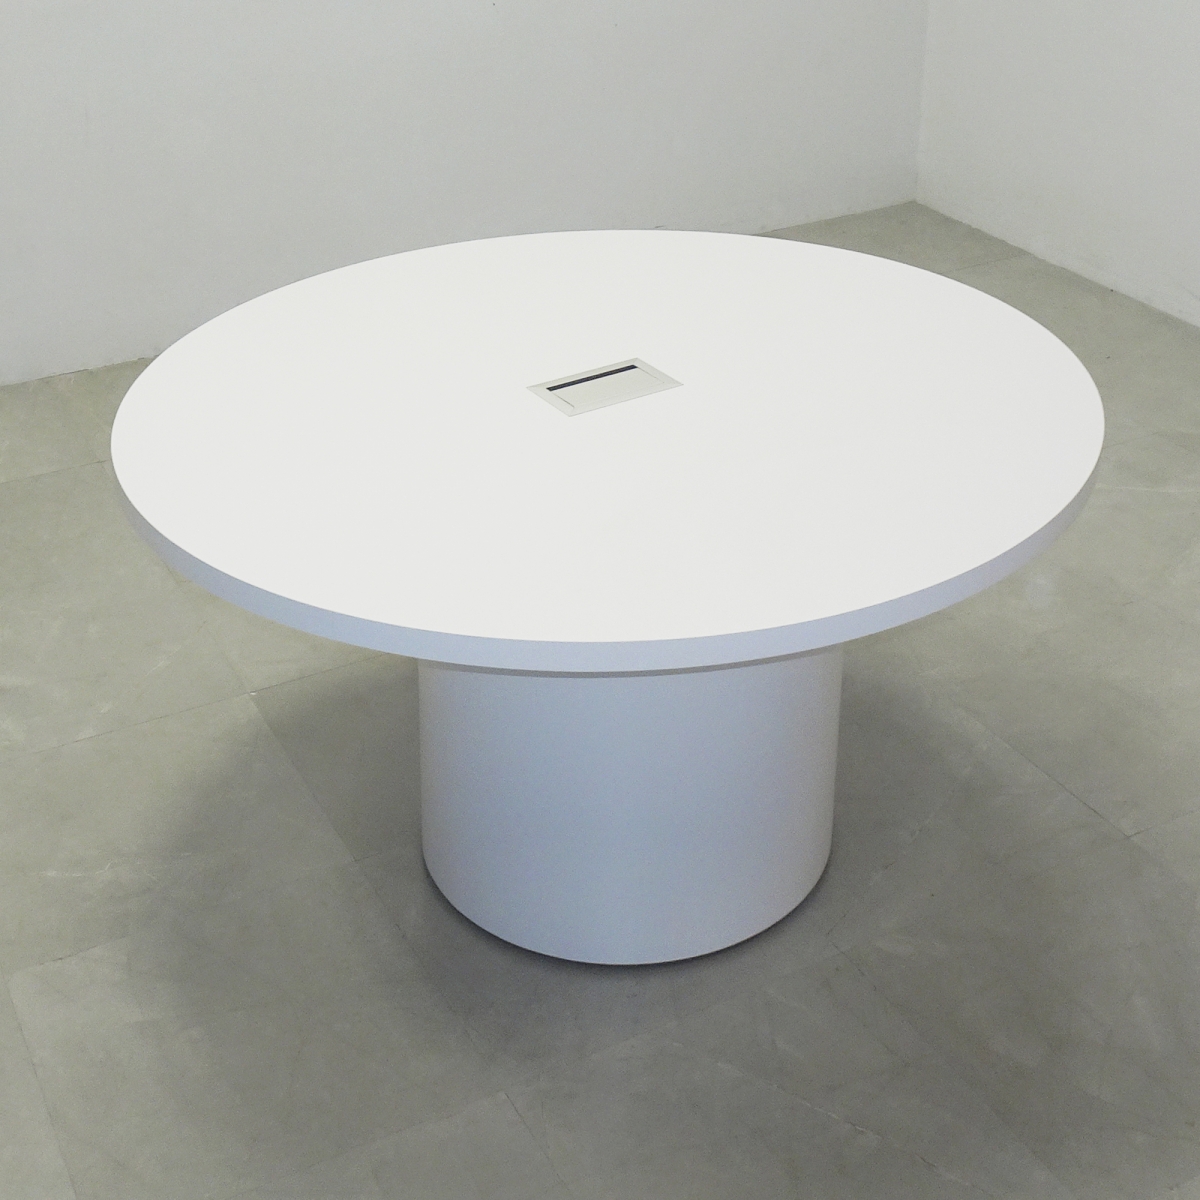 60 In. Axis Round Matte Meeting Table -Stock # 1001-D